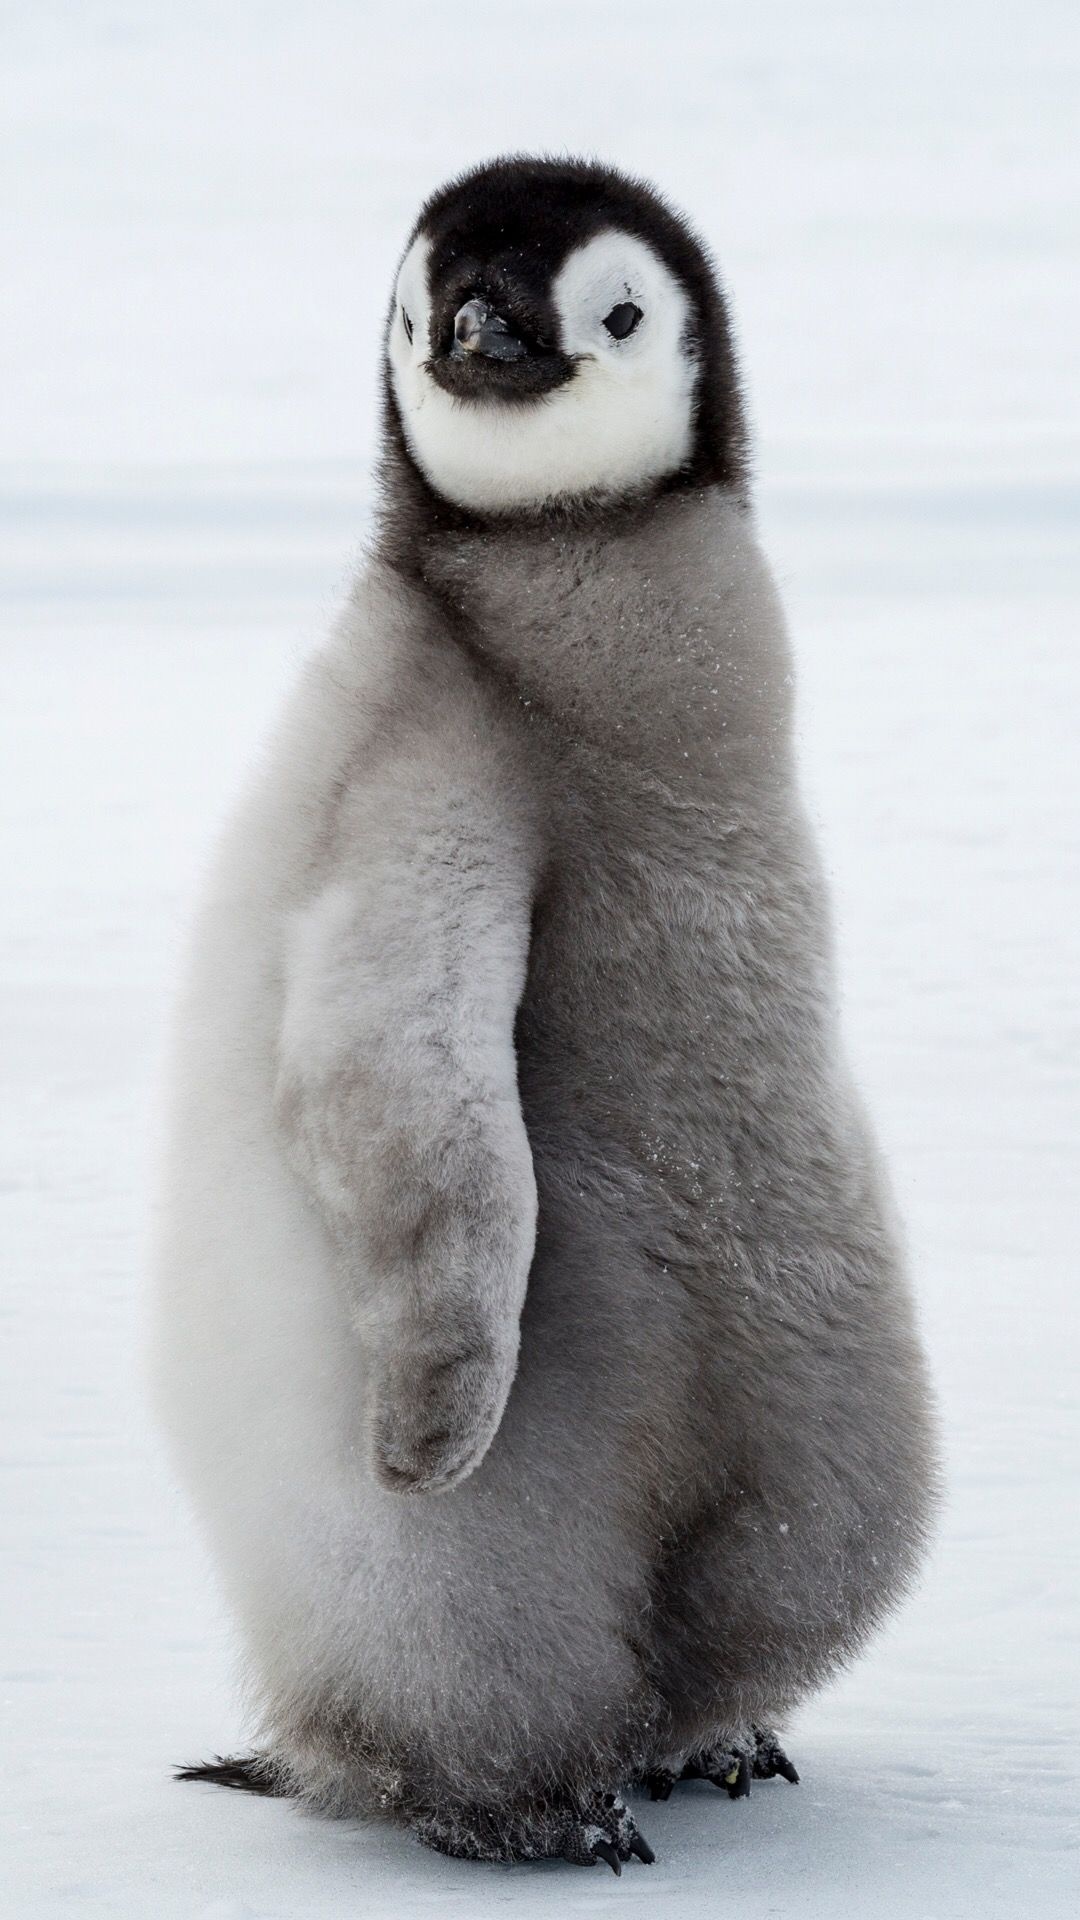 Penguin animal wallpapers, Posted by Ethan Anderson, Adorable creatures, Nature's wonders, 1080x1920 Full HD Phone